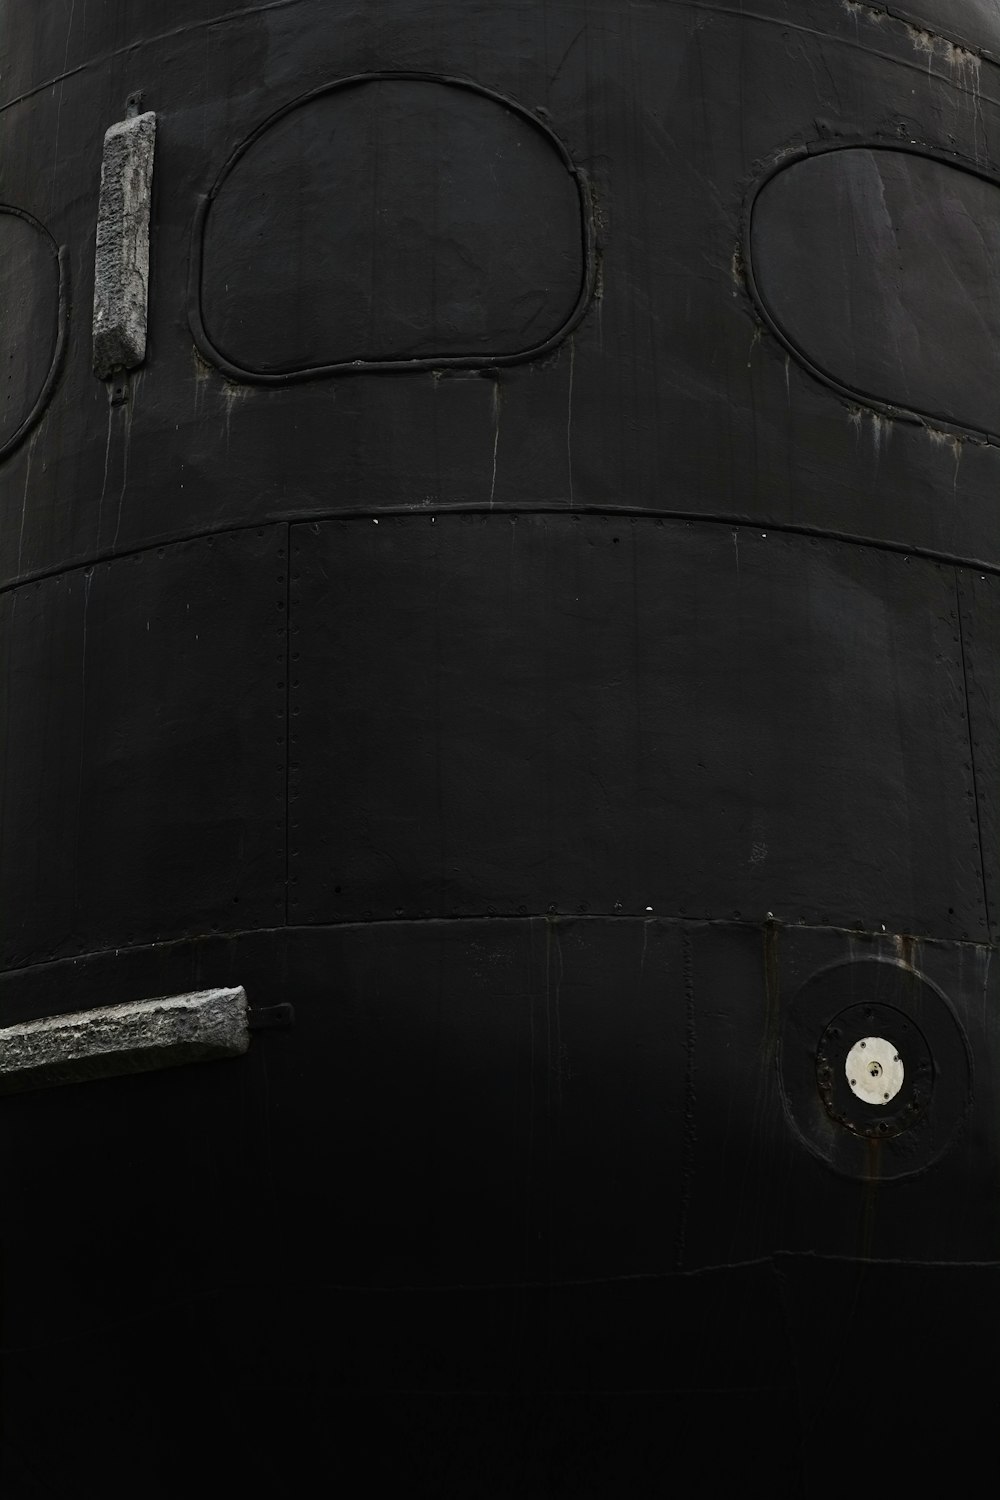 a close up of the side of a large black object